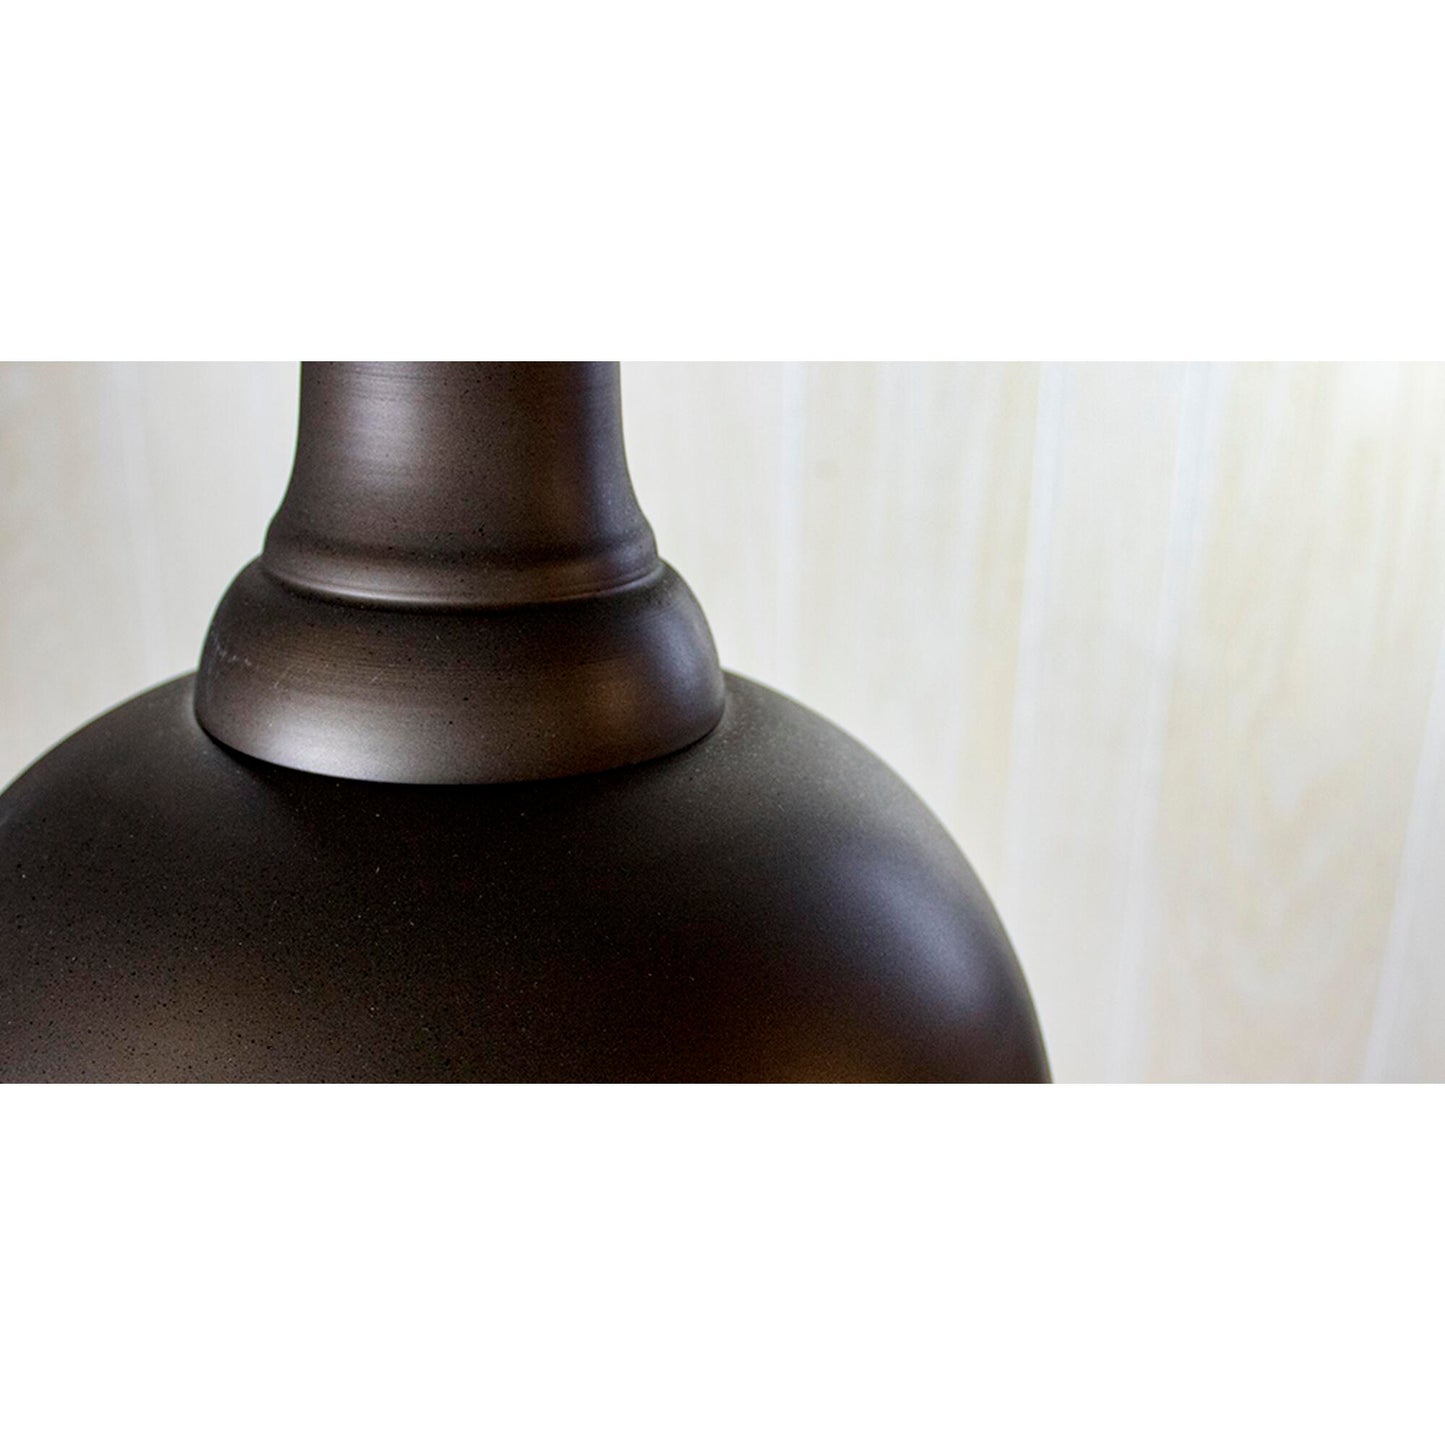 14w 1-Light Dome Pendant Oiled Bronze by Quorum. Traditional Design Perfect for updating a kitchen island, over a bar, or adding a fresh look to a bathroom